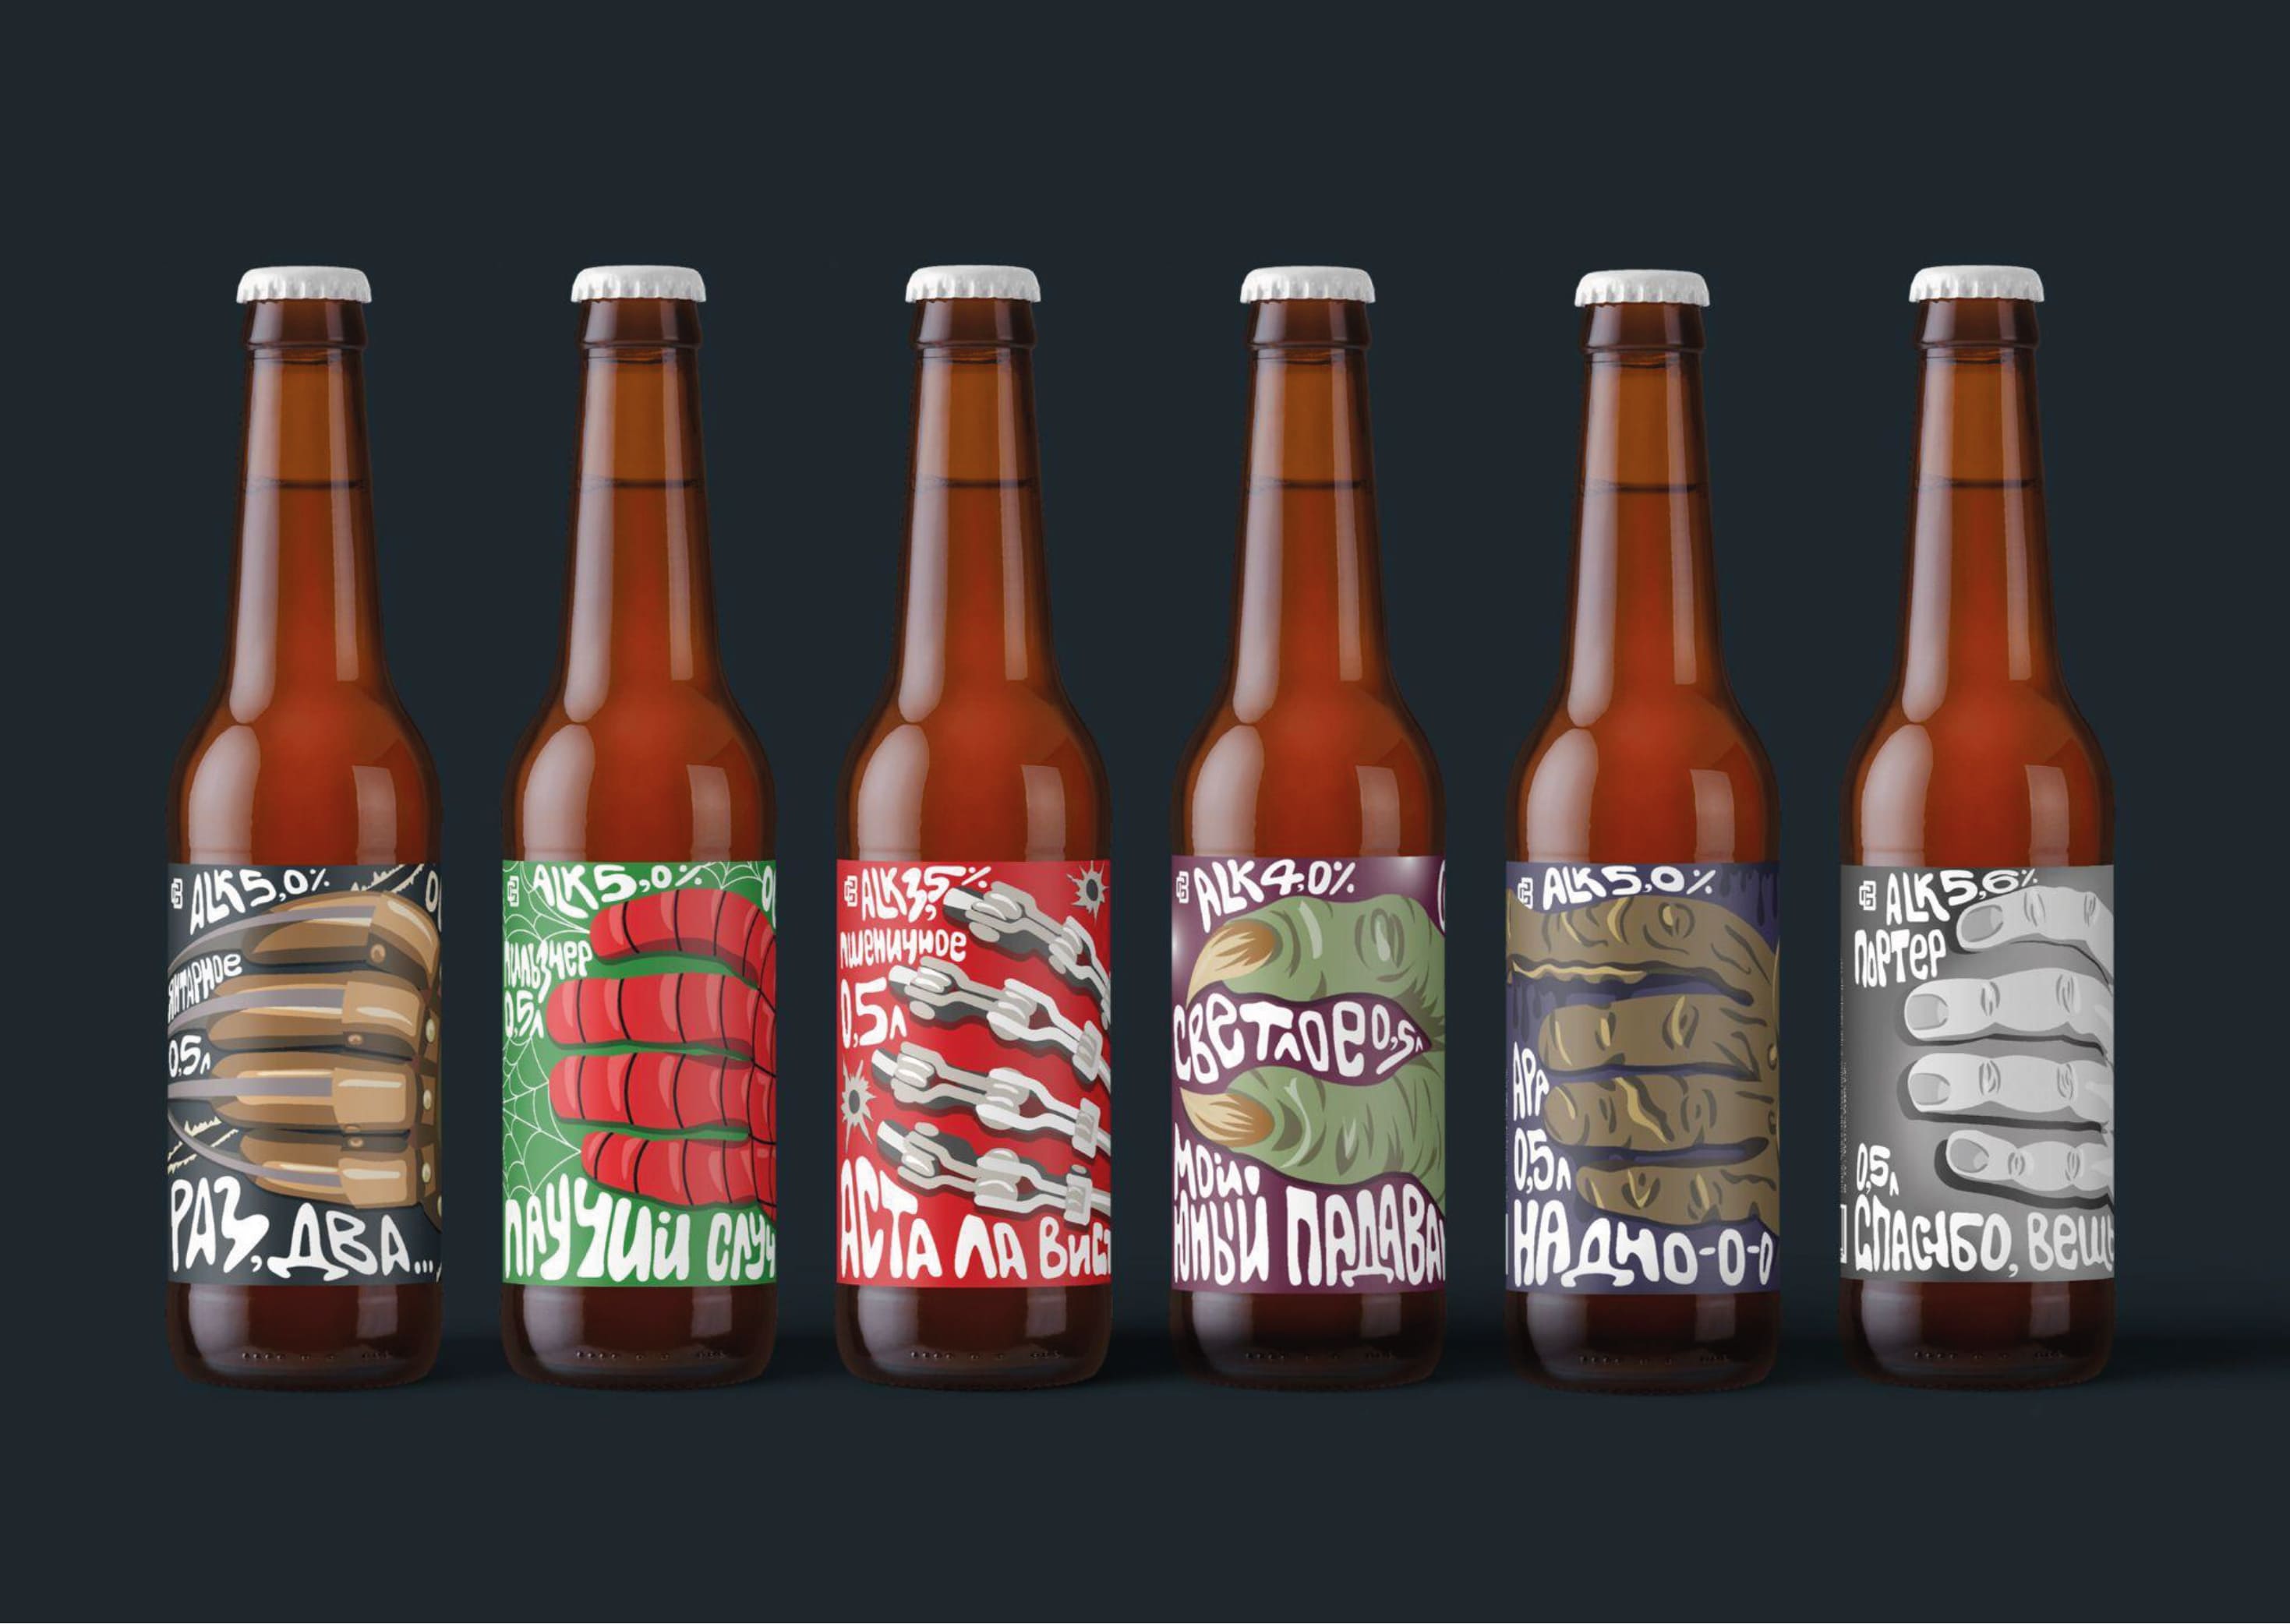 Student Concept for Rebranding of Beer Packaging Design for the Credo Brewery